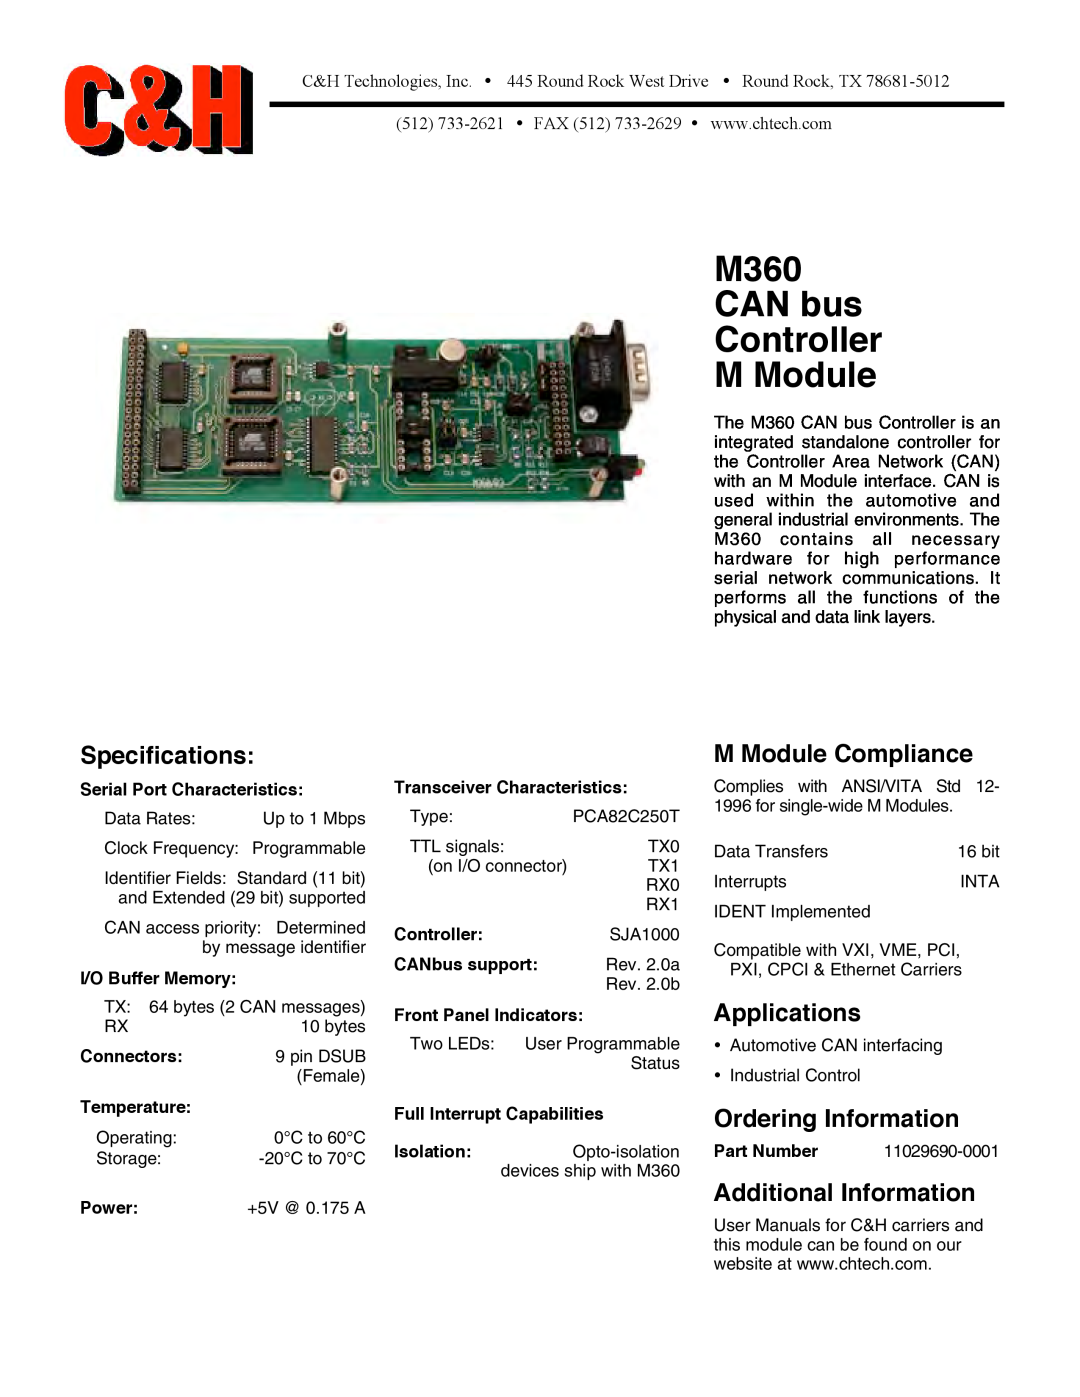 CH Tech specifications M360 CAN bus Controller M Module, Specifications, M Module Compliance, Applications 